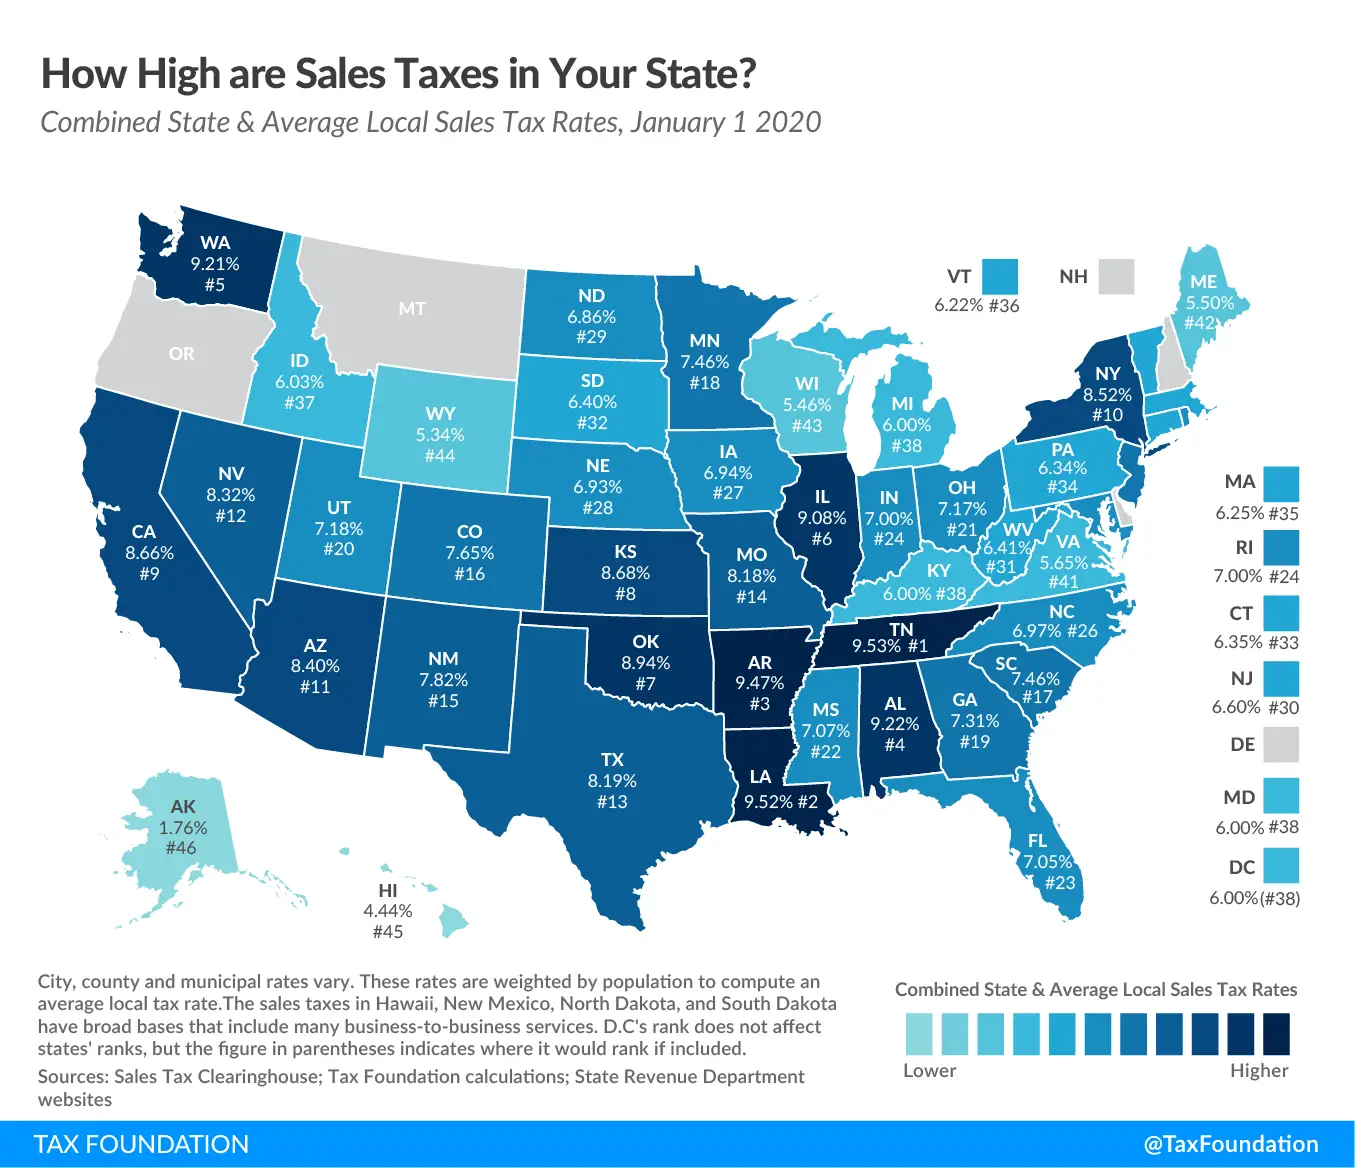 State and Local Sales Tax Rates, 2020